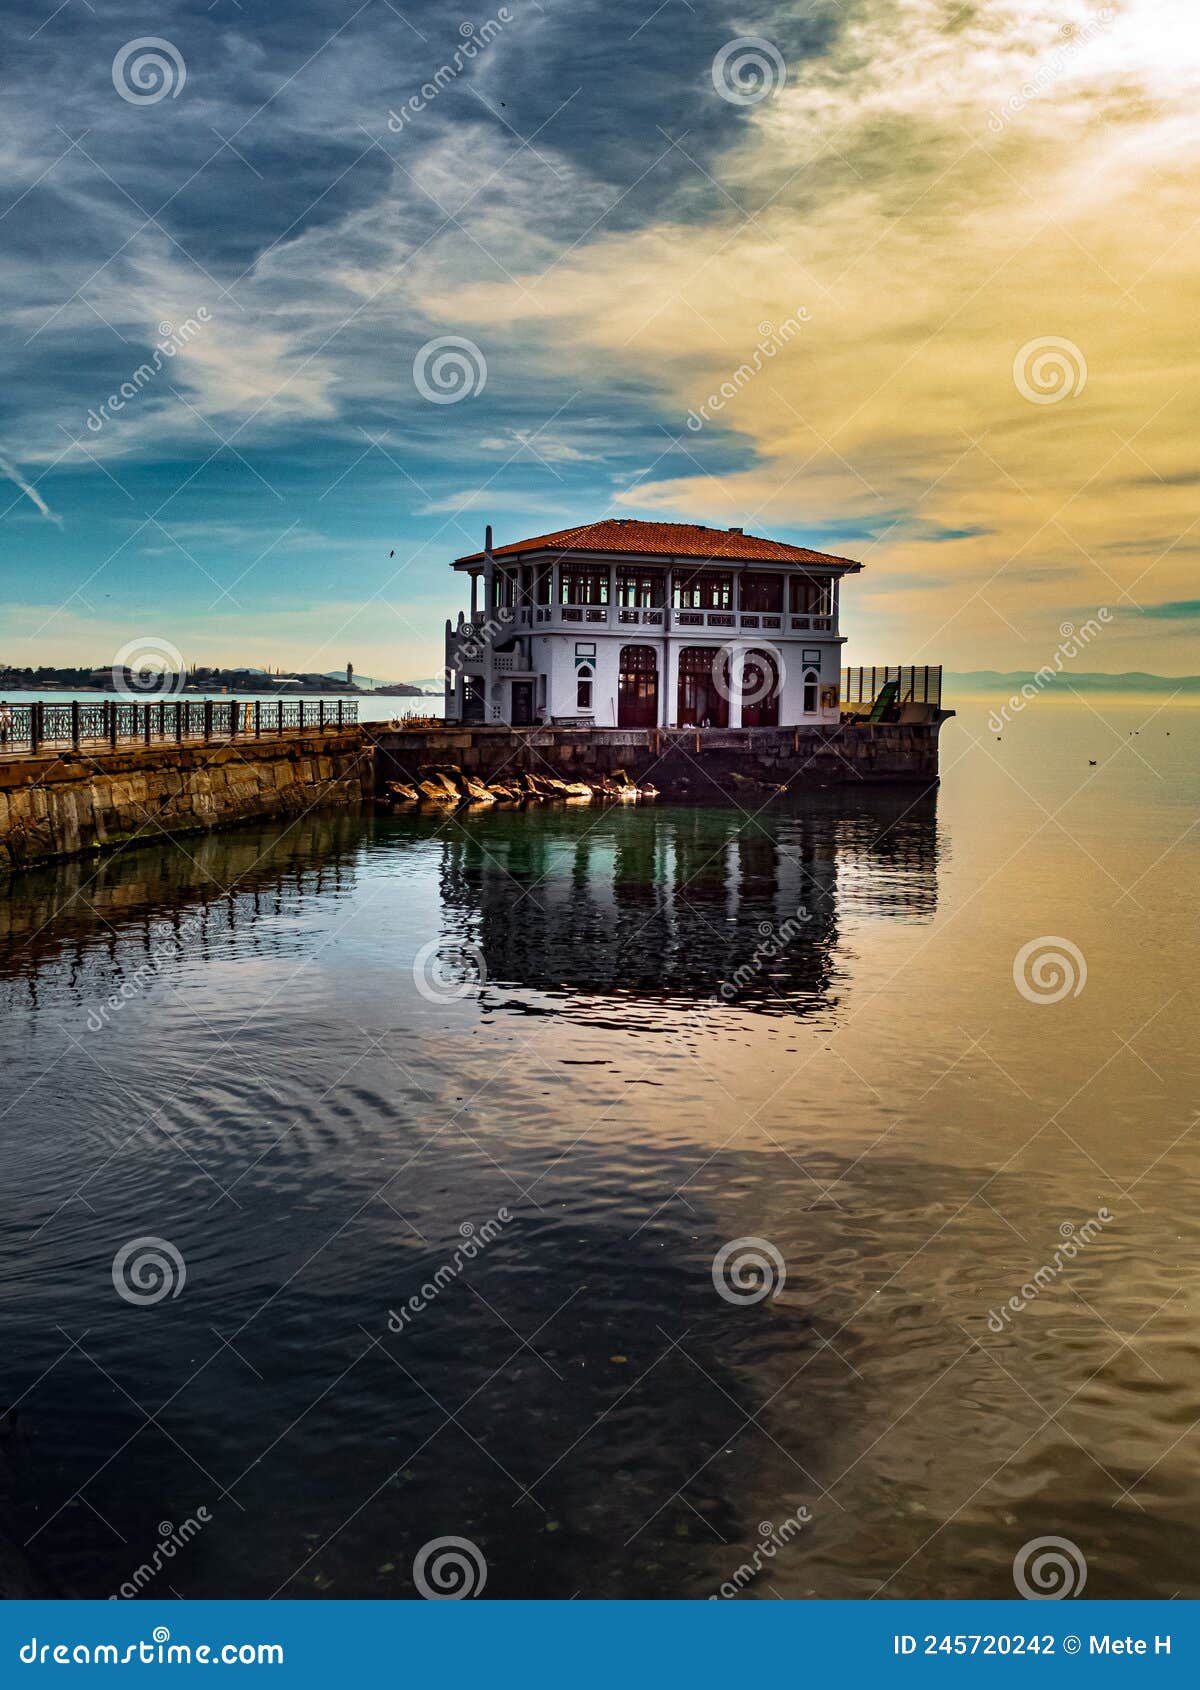 an old pier building in a part of istanbul called moda as part of the seascape.